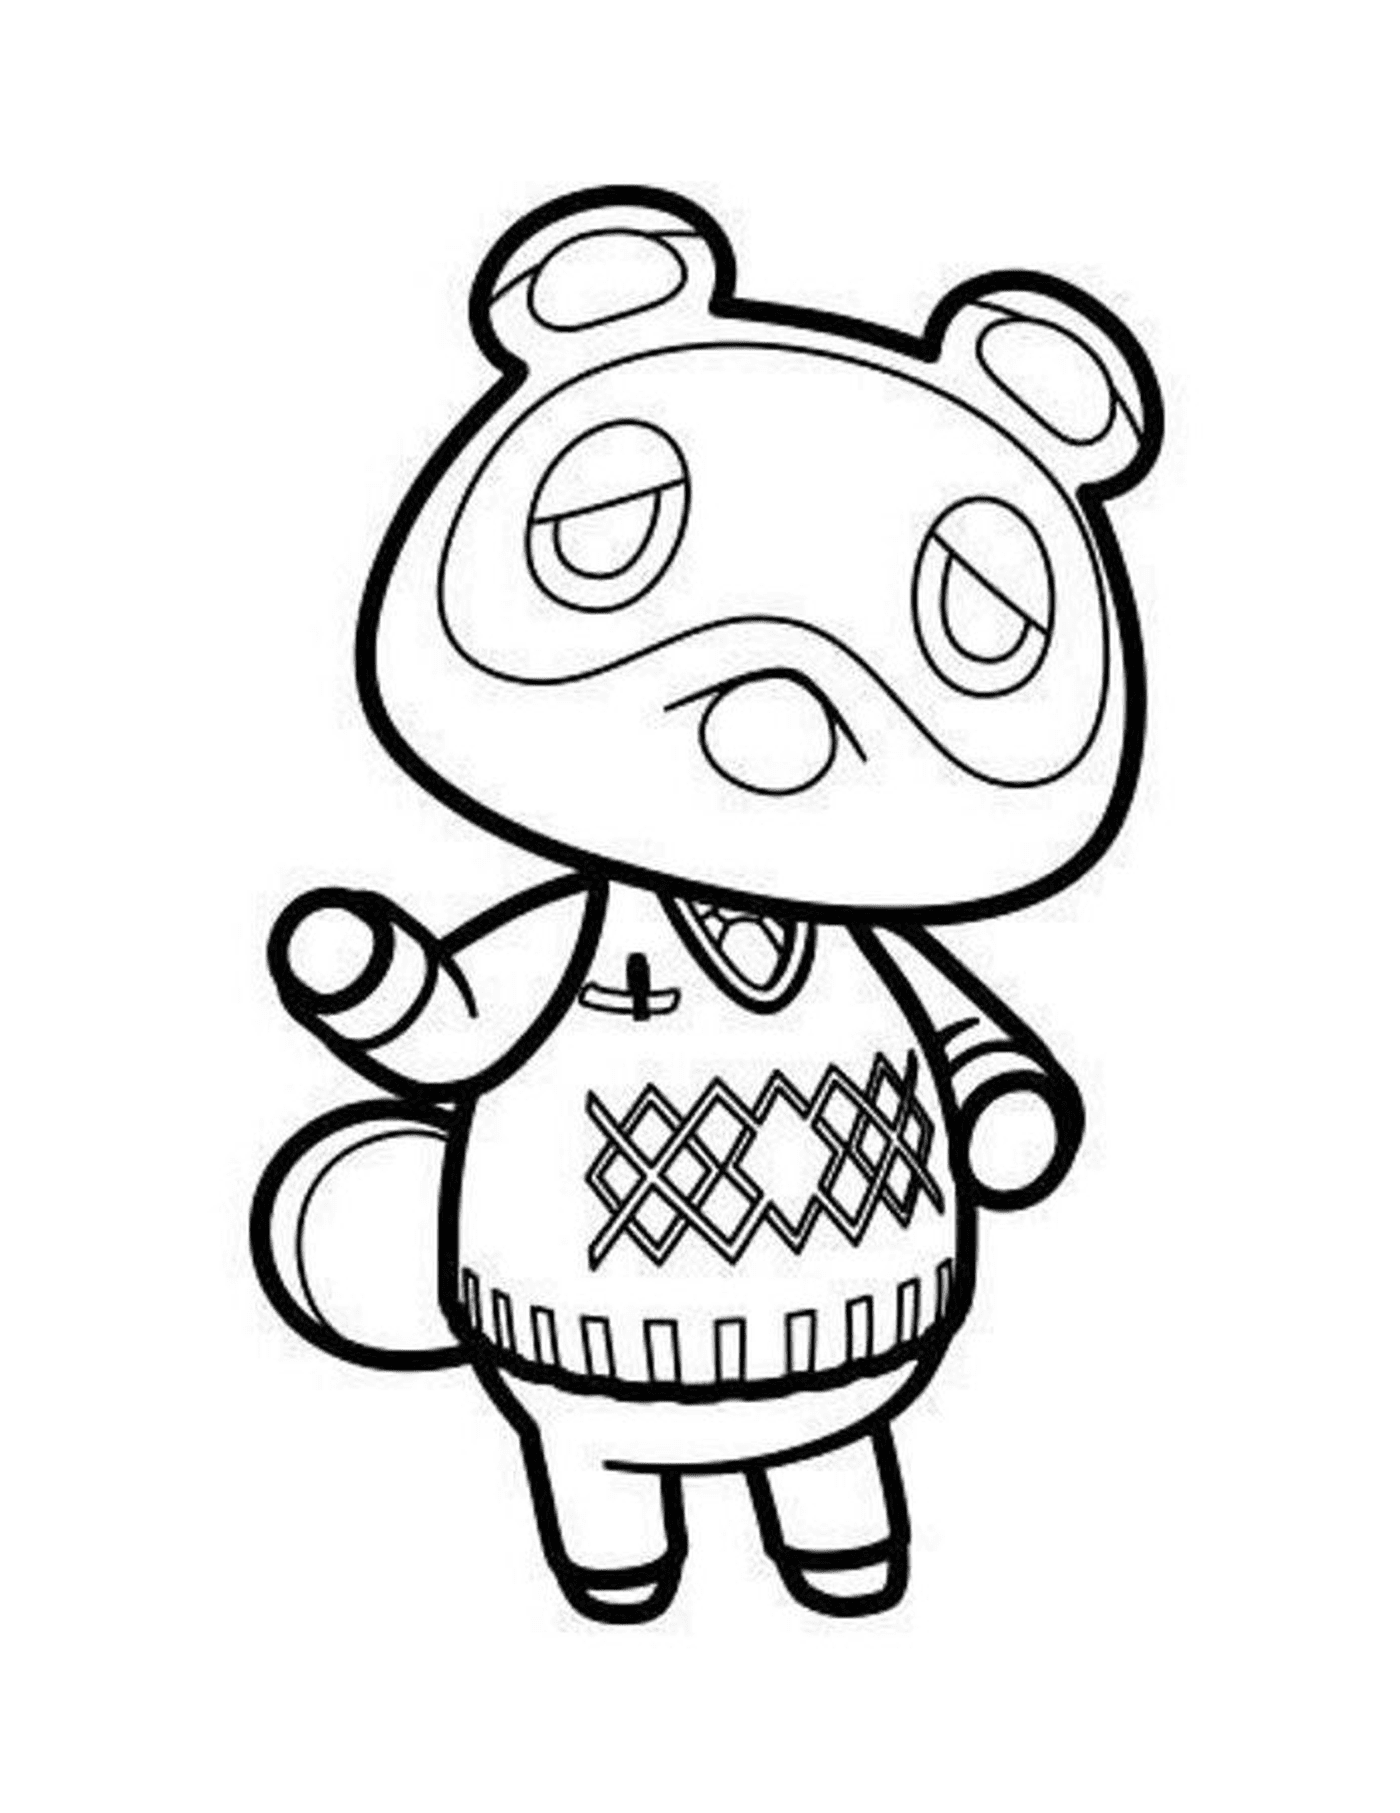  Tom Nook from Animal Crossing, animal with a sweater 